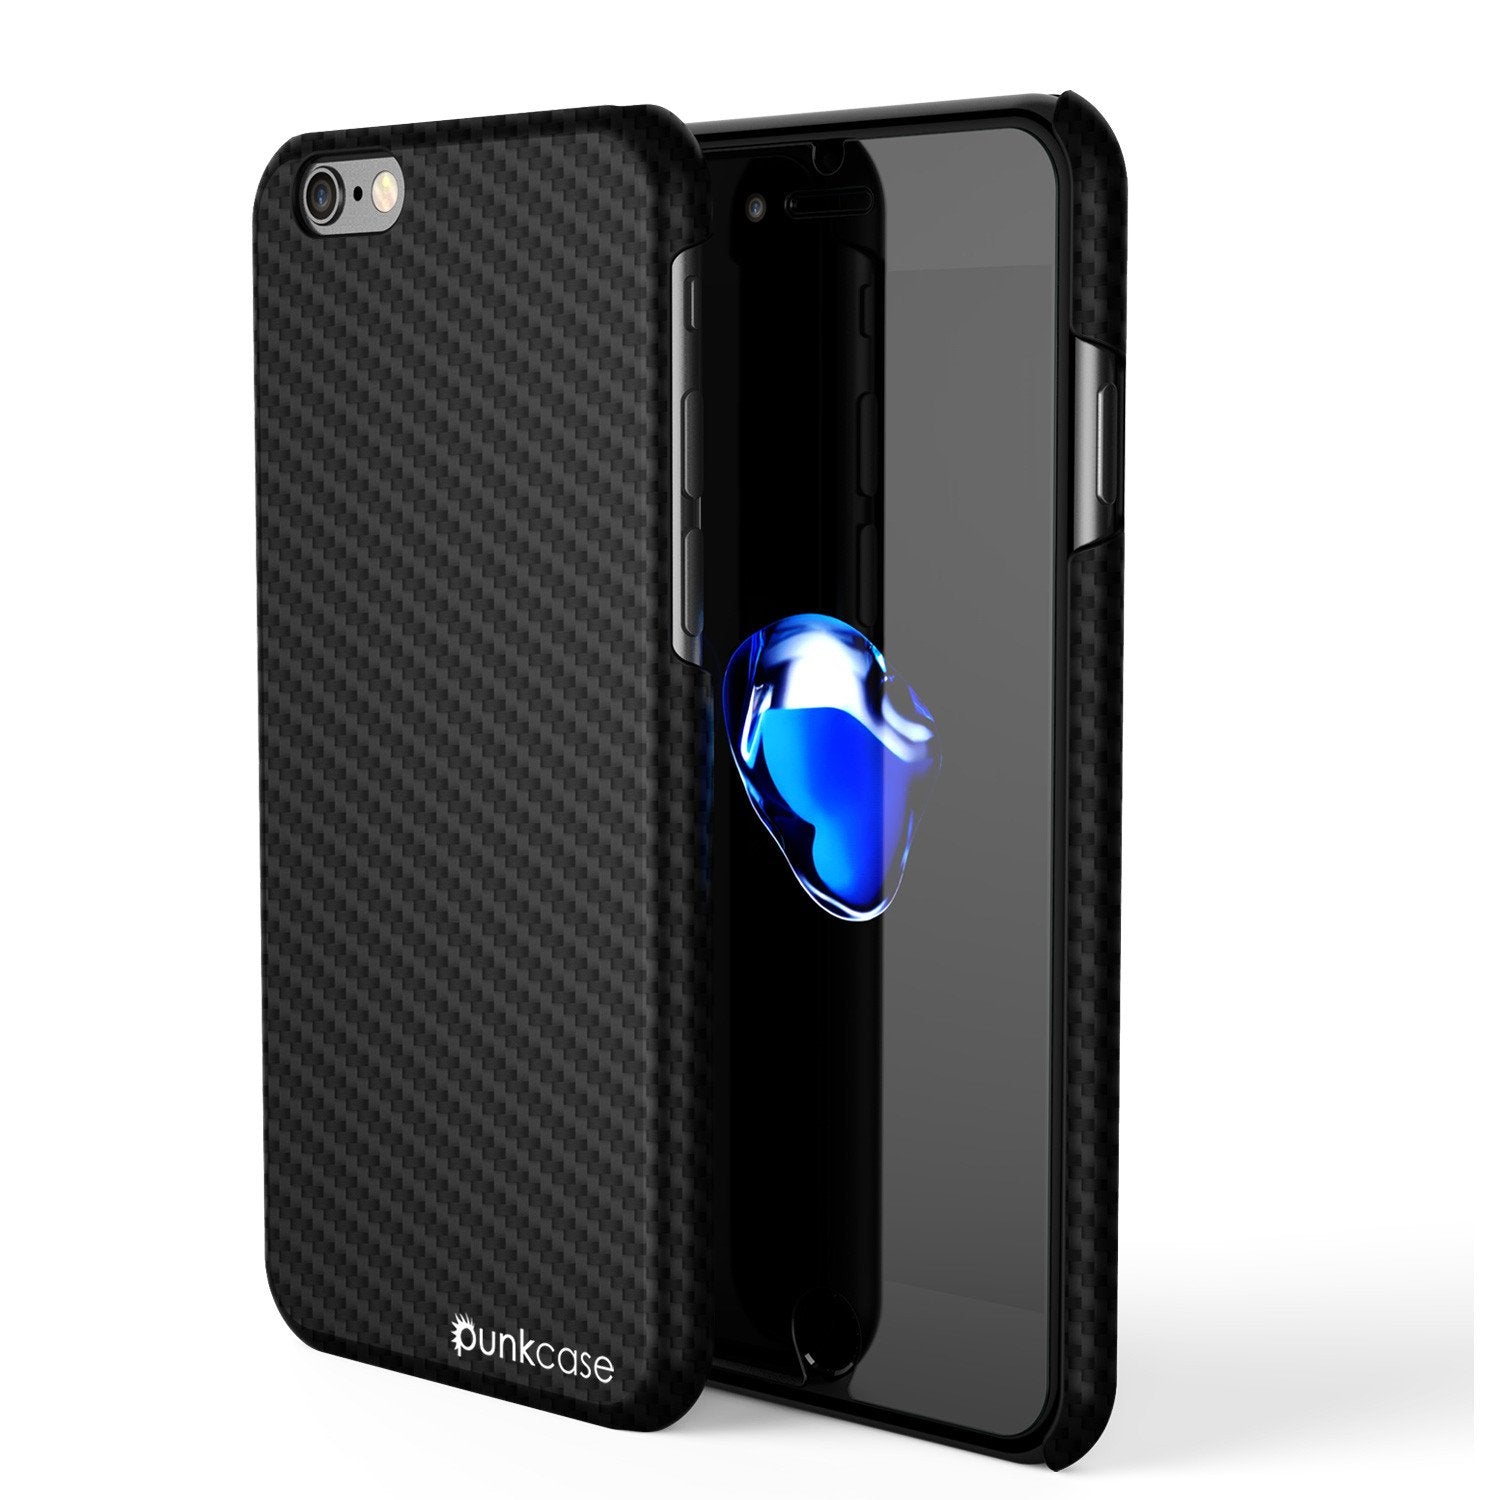 iPhone 8 Case, Punkcase CarbonShield Jet Black with 0.3mm Tempered Glass